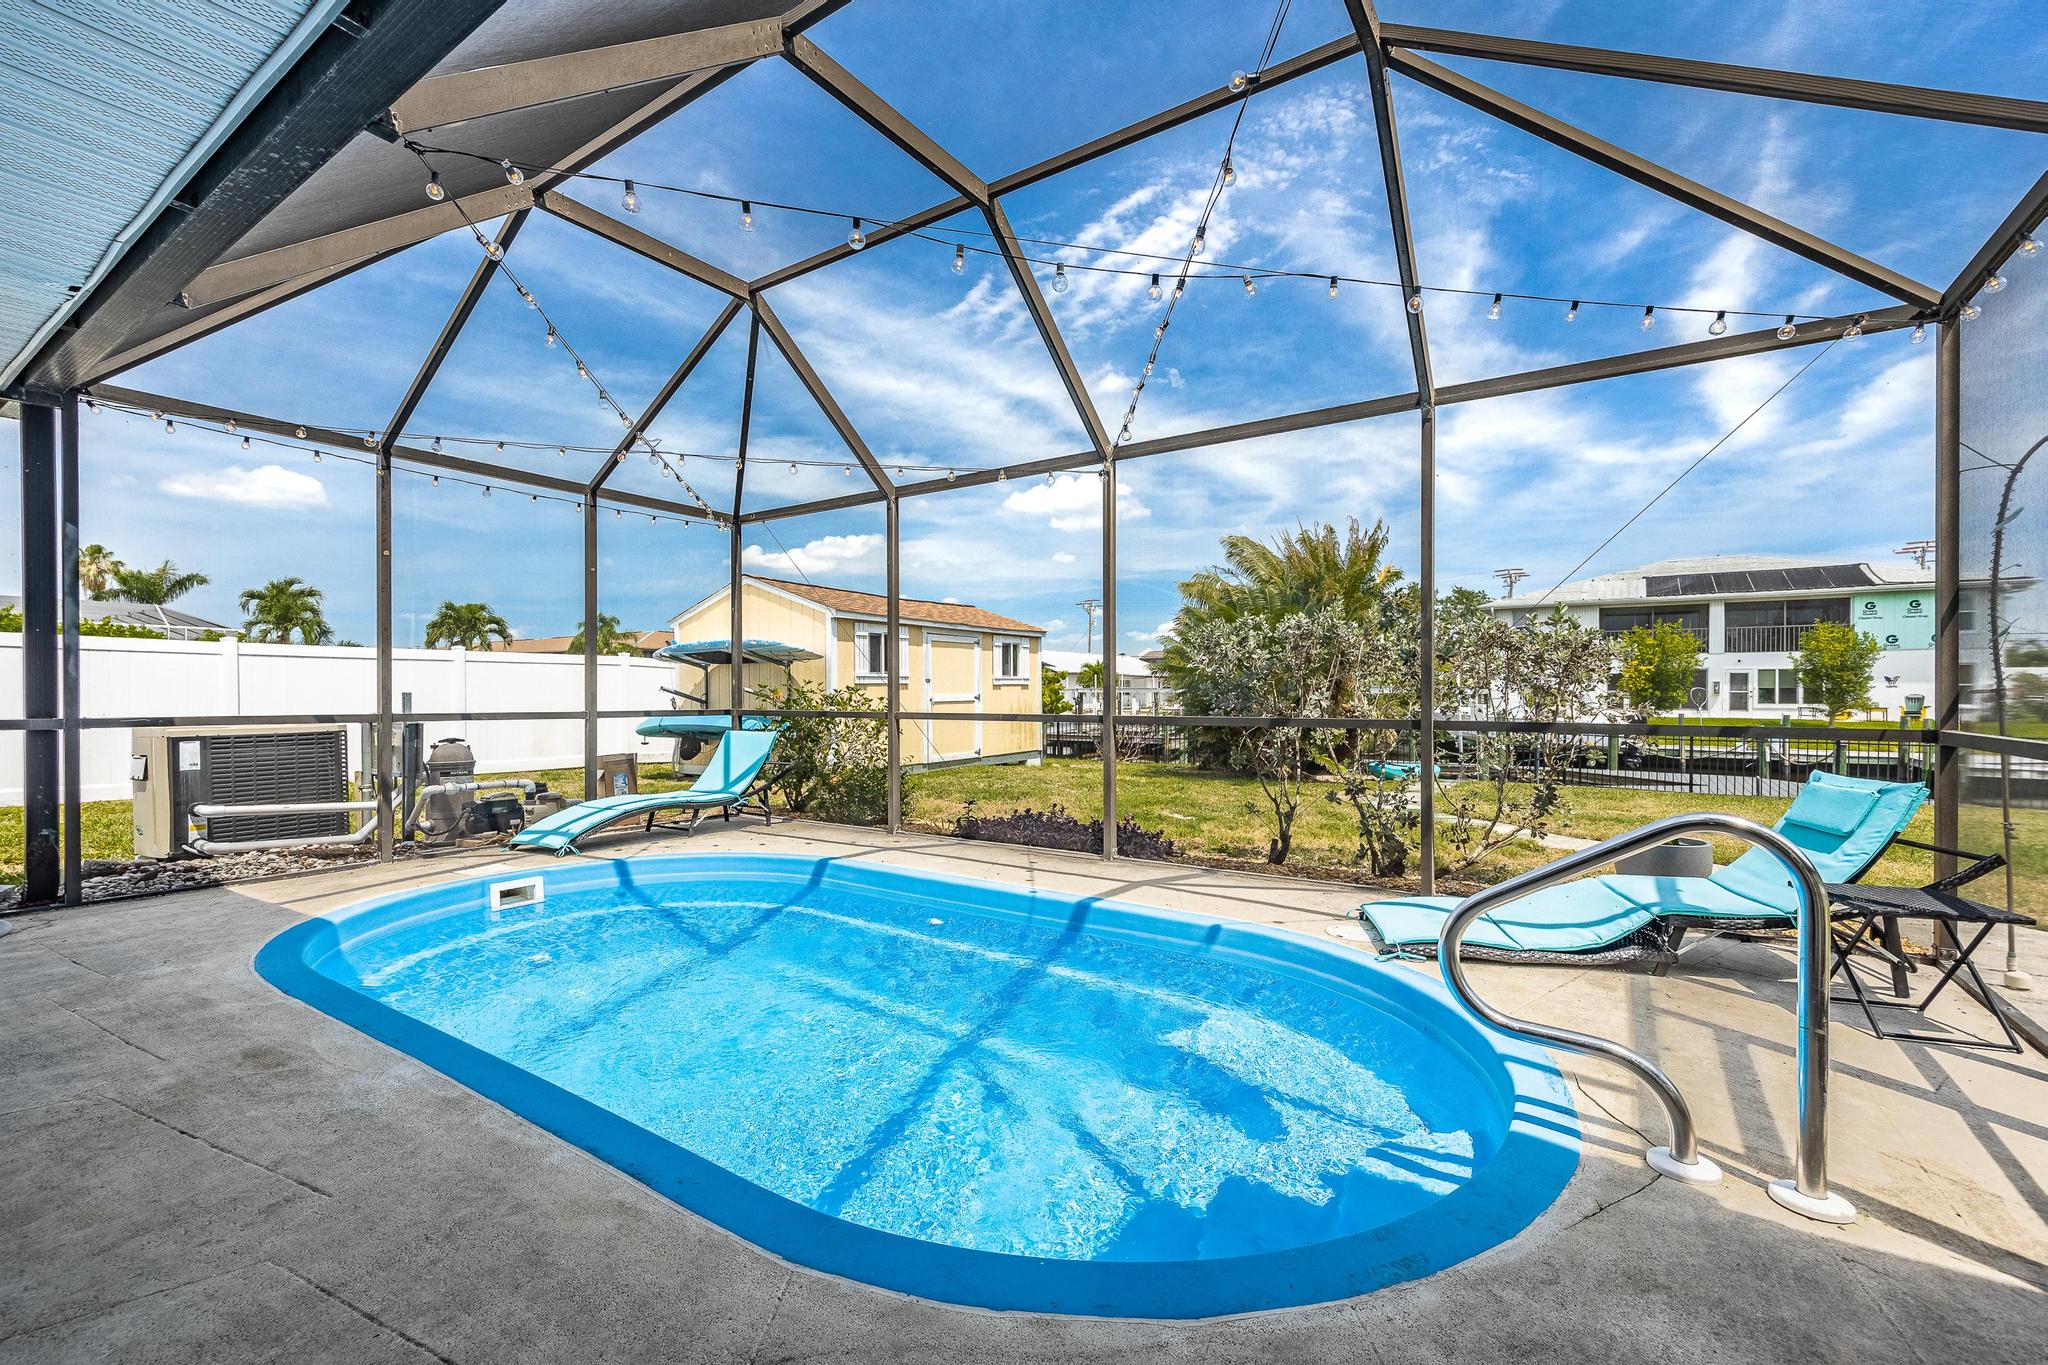 Vacation rental with heated pool and back yard